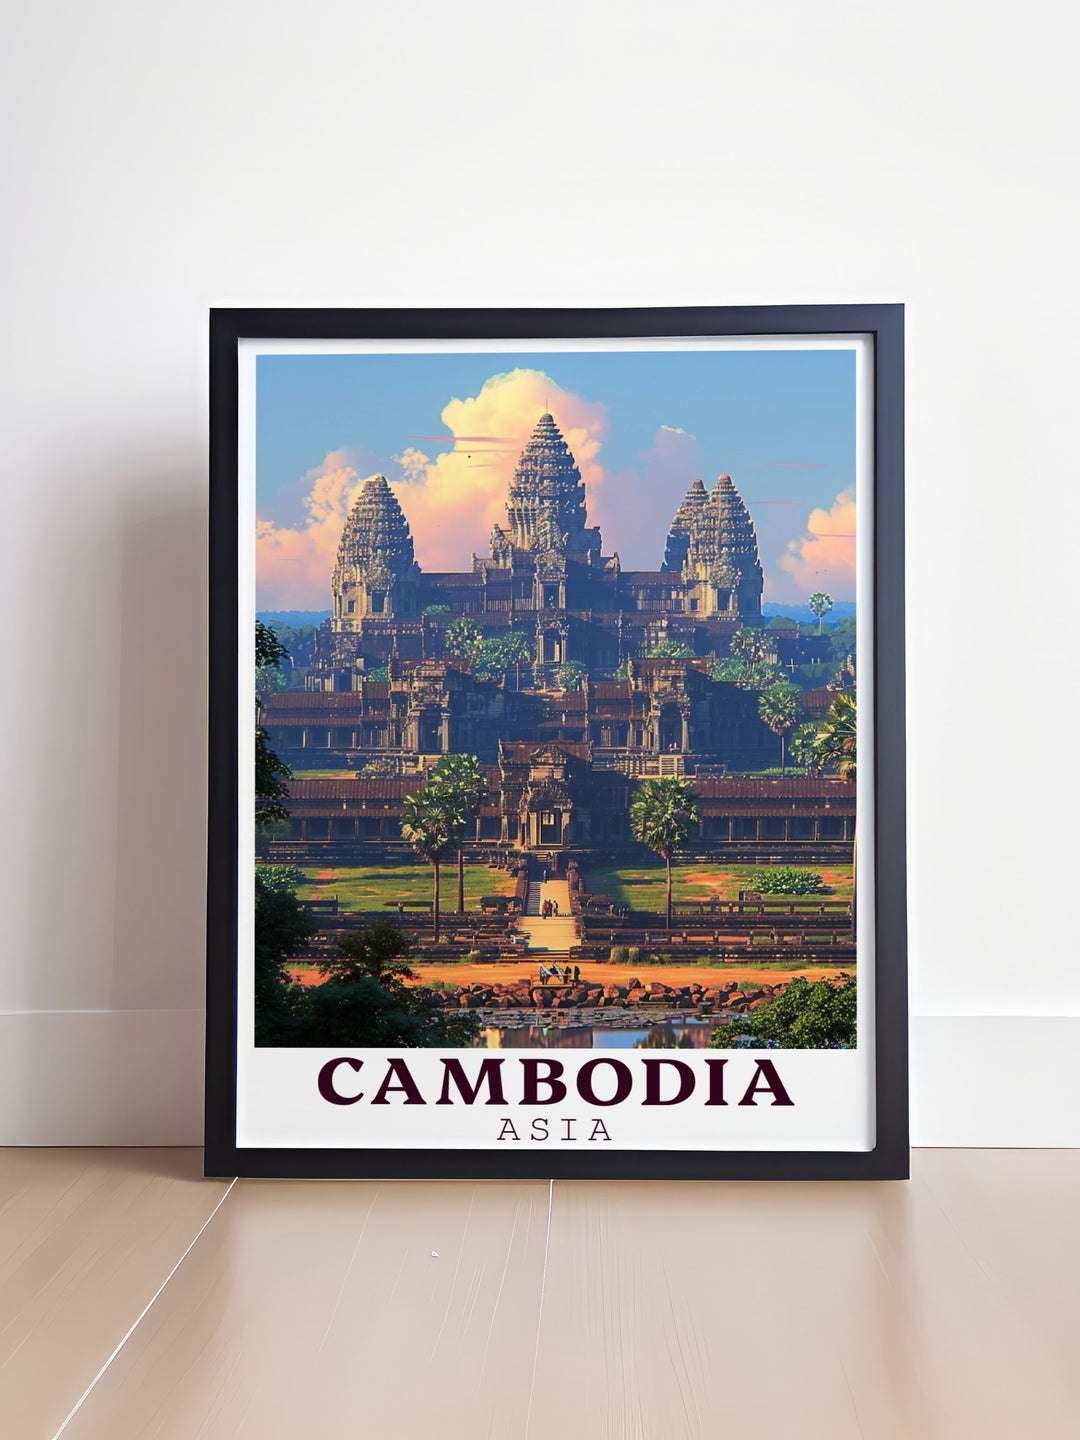 Elegant Angkor Wat artwork in a vintage print style capturing the ancient beauty of Cambodias most iconic landmark ideal for wall art and home decor.